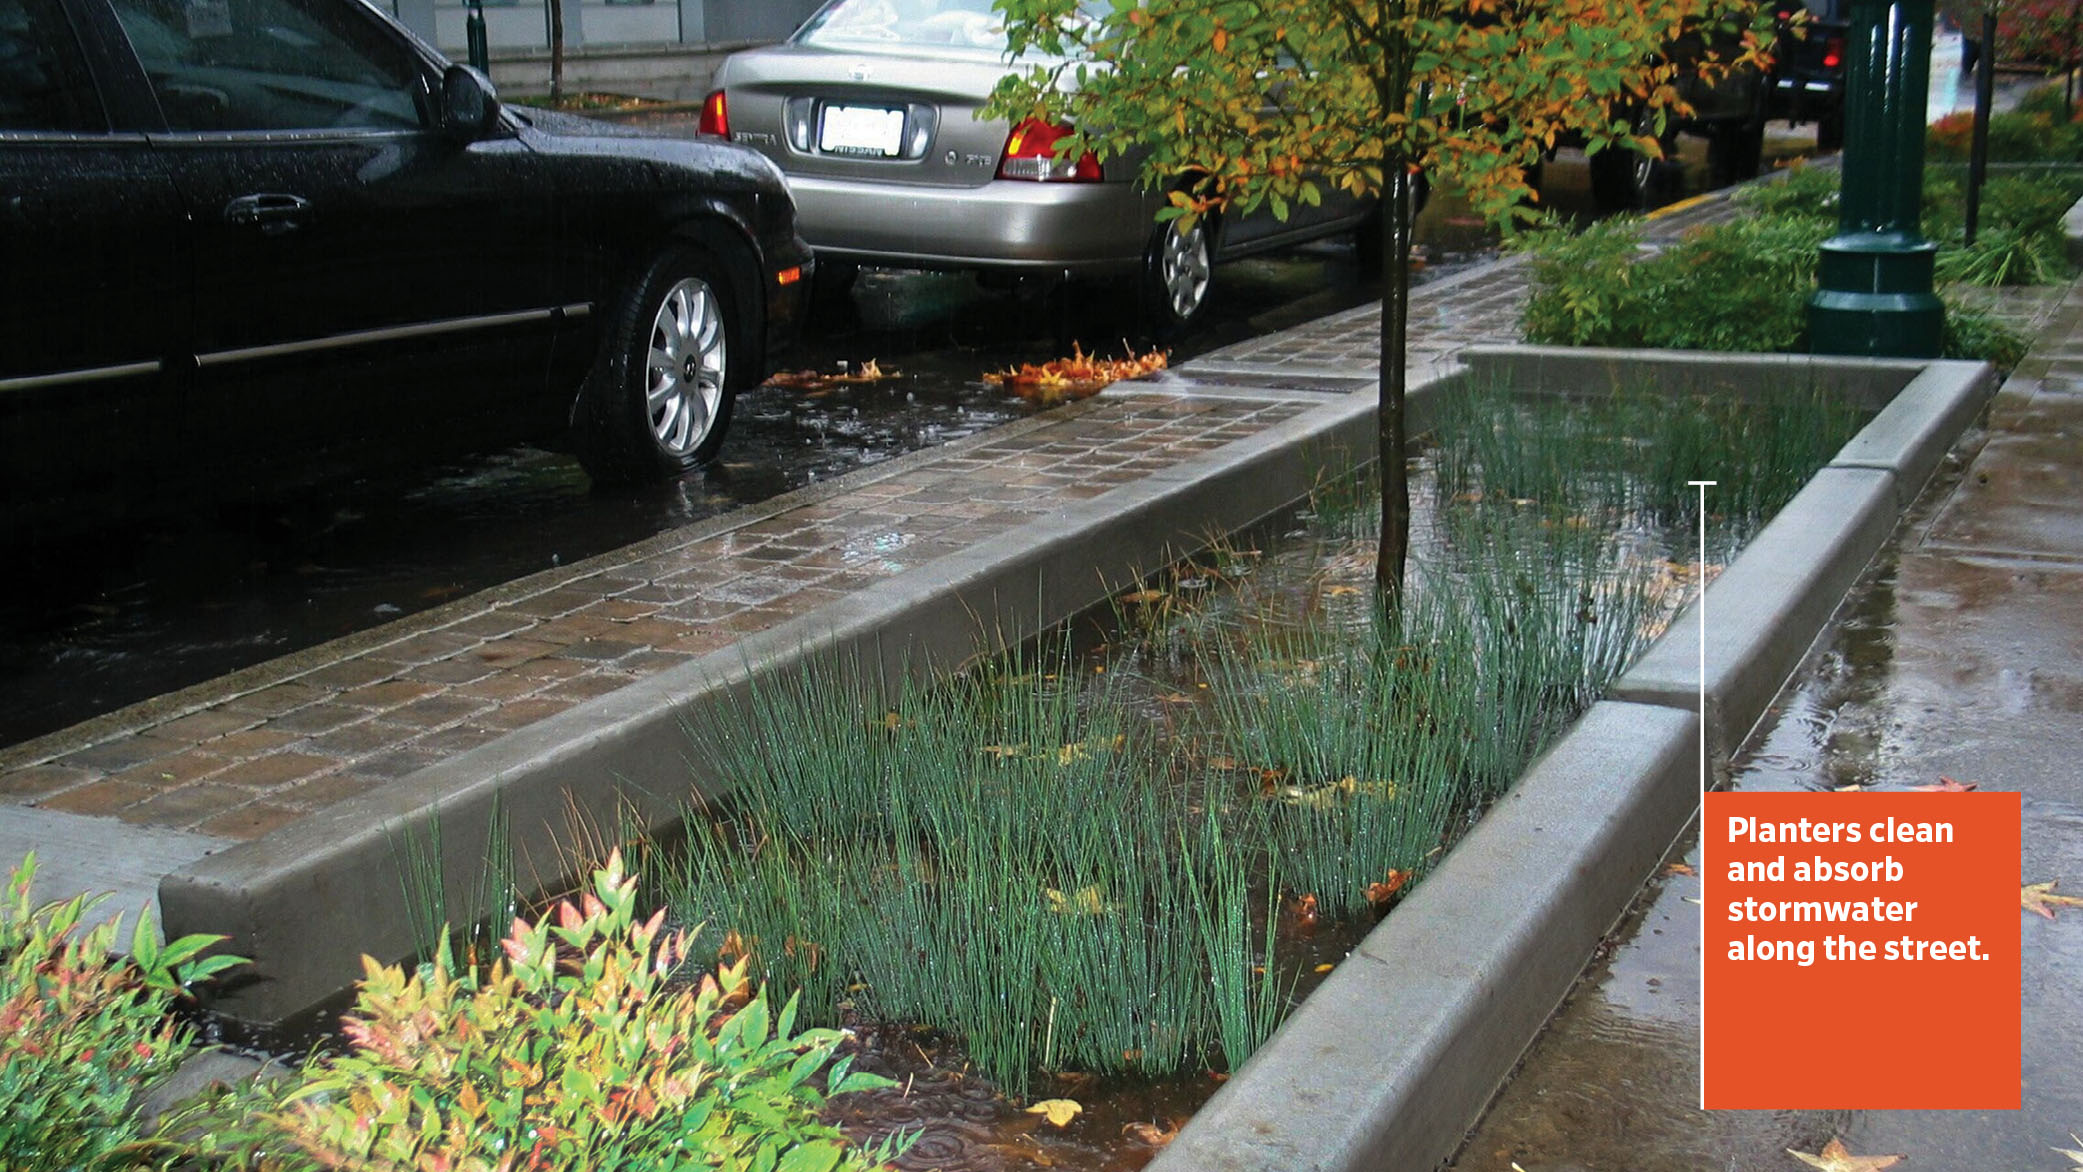 Each stormwater planter captures runoff to a depth of six inches until it flows back out into the street and is collected in the next downhill planter.